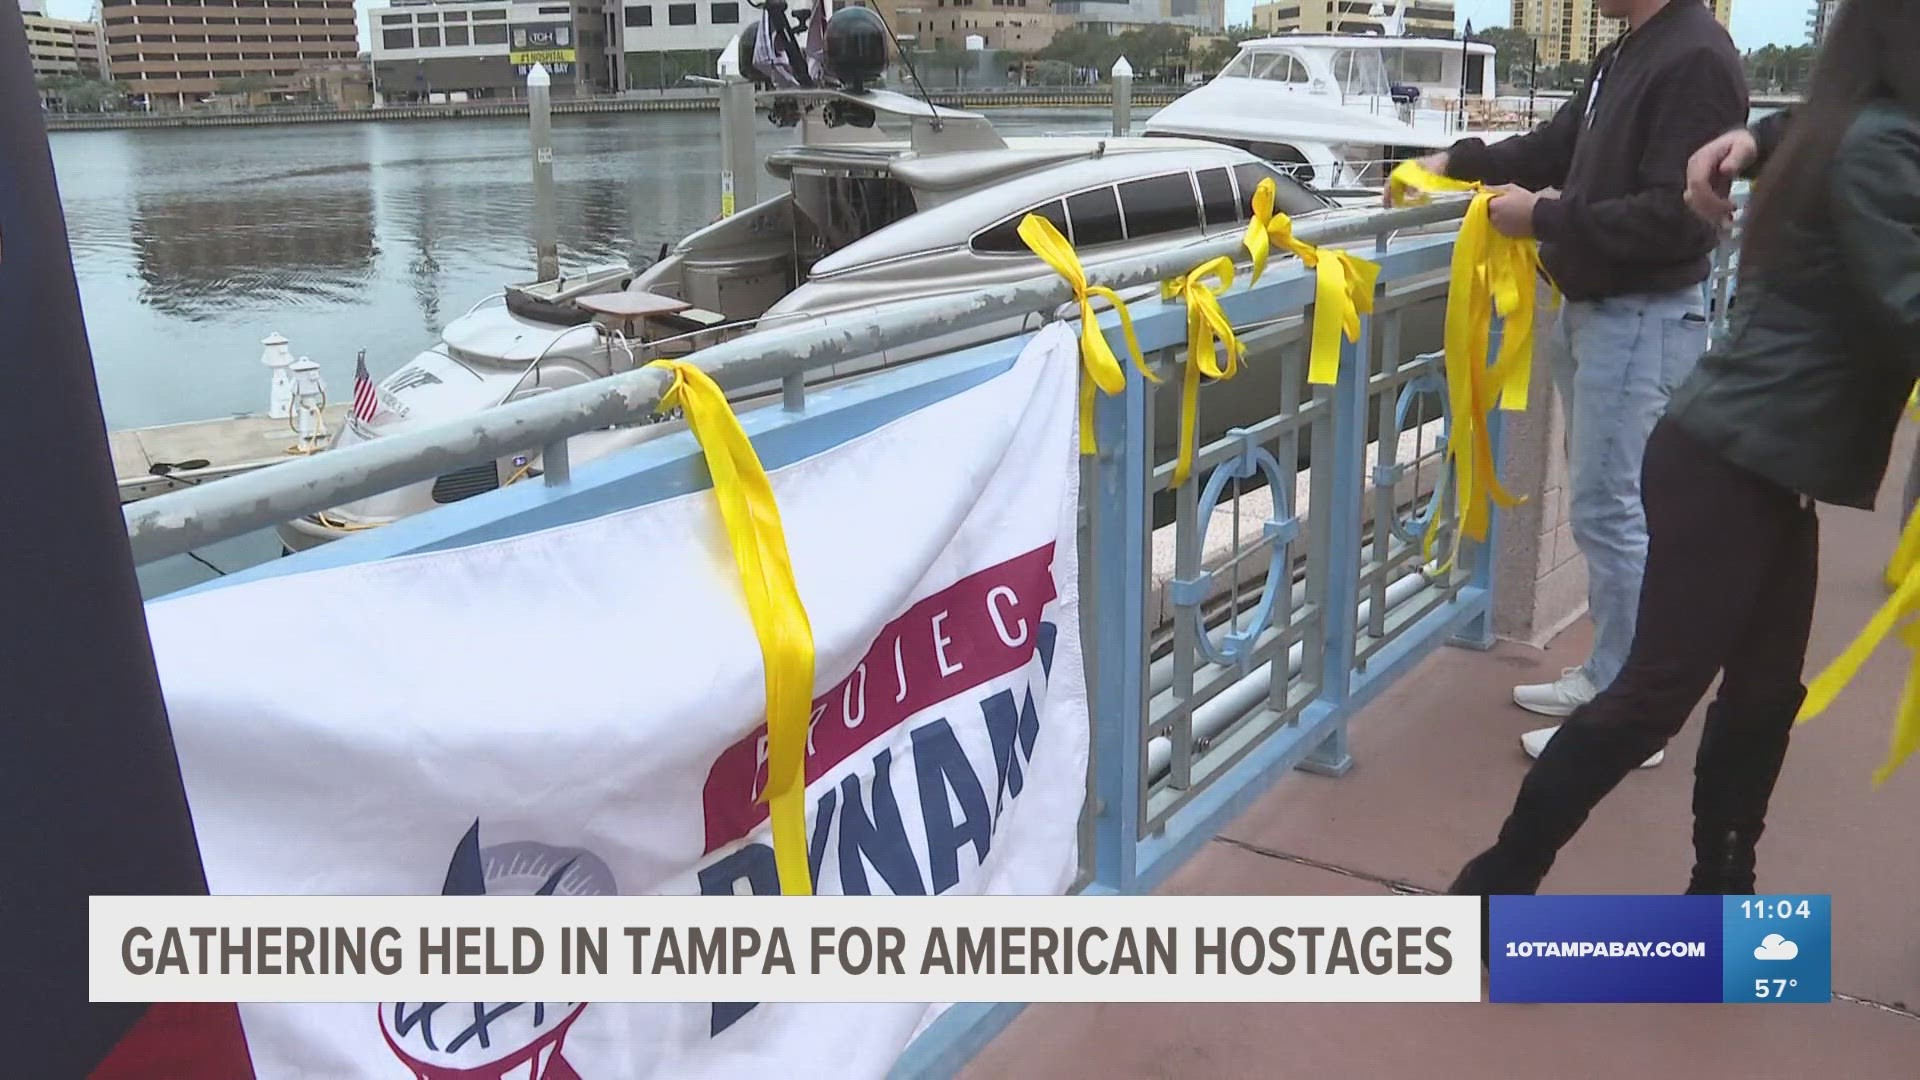 Project Dynamo rallied dozens in Tampa to tie a yellow ribbon in honor of the eight American hostages still in Gaza.